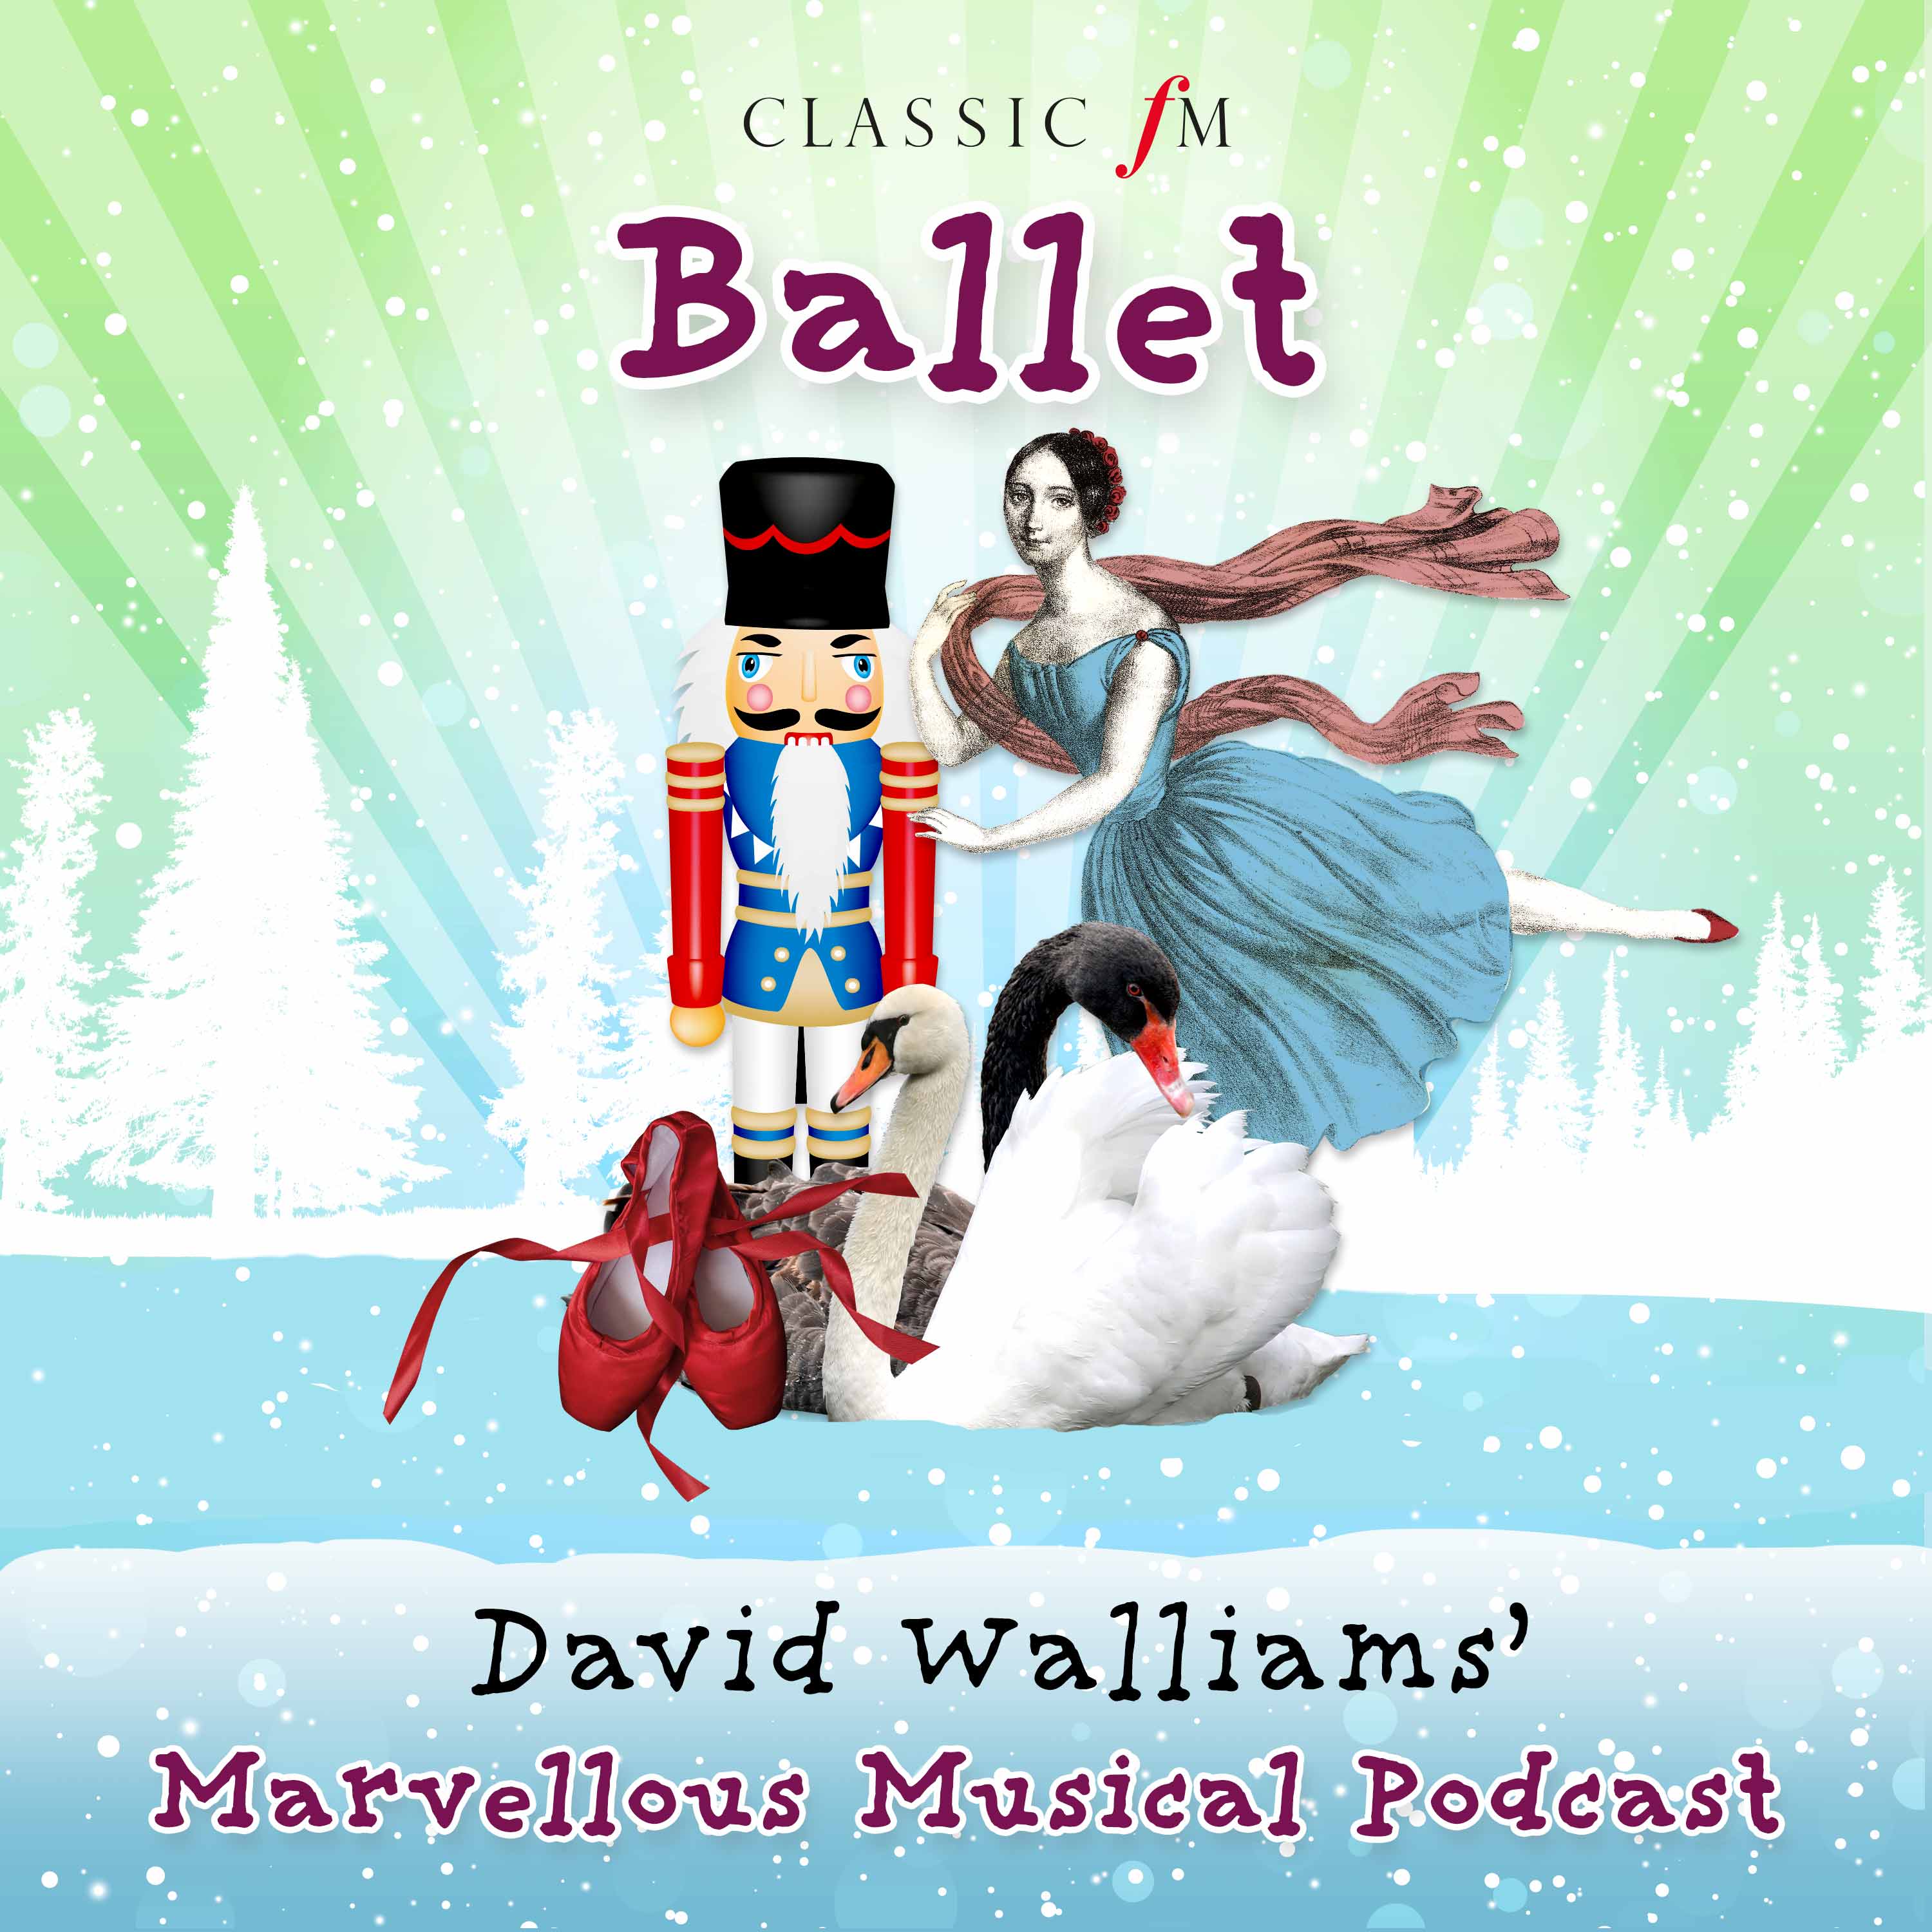 David Walliams' Marvellous Musical Podcast cover a